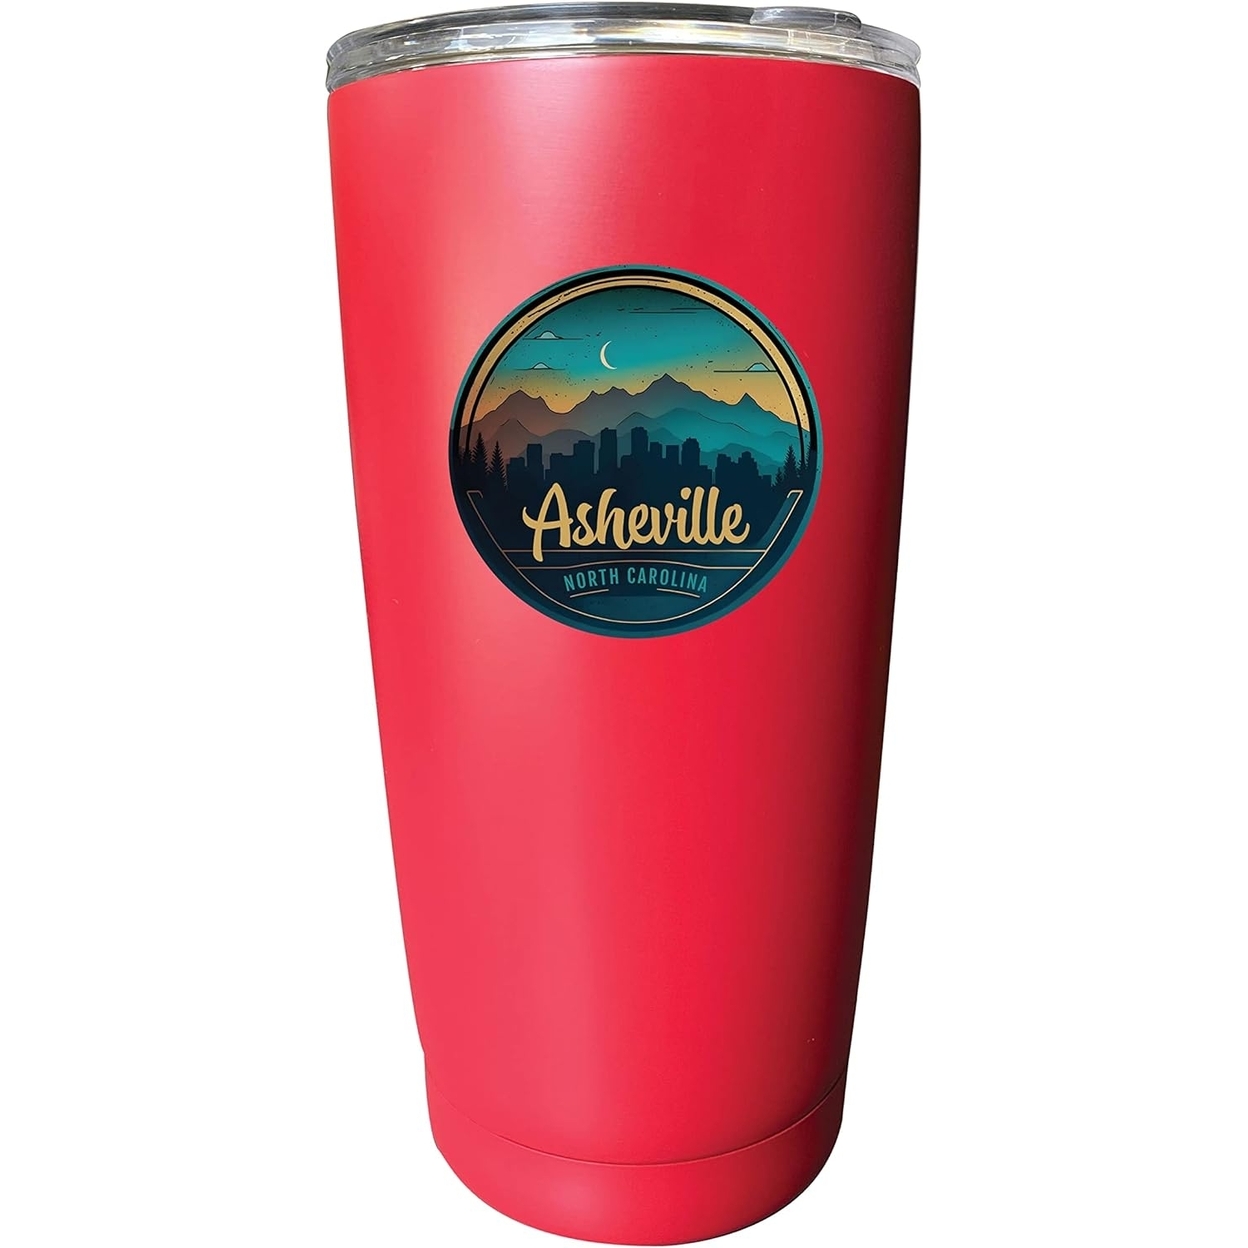 Asheville North Carolina Souvenir 16 Oz Stainless Steel Insulated Tumbler - Red